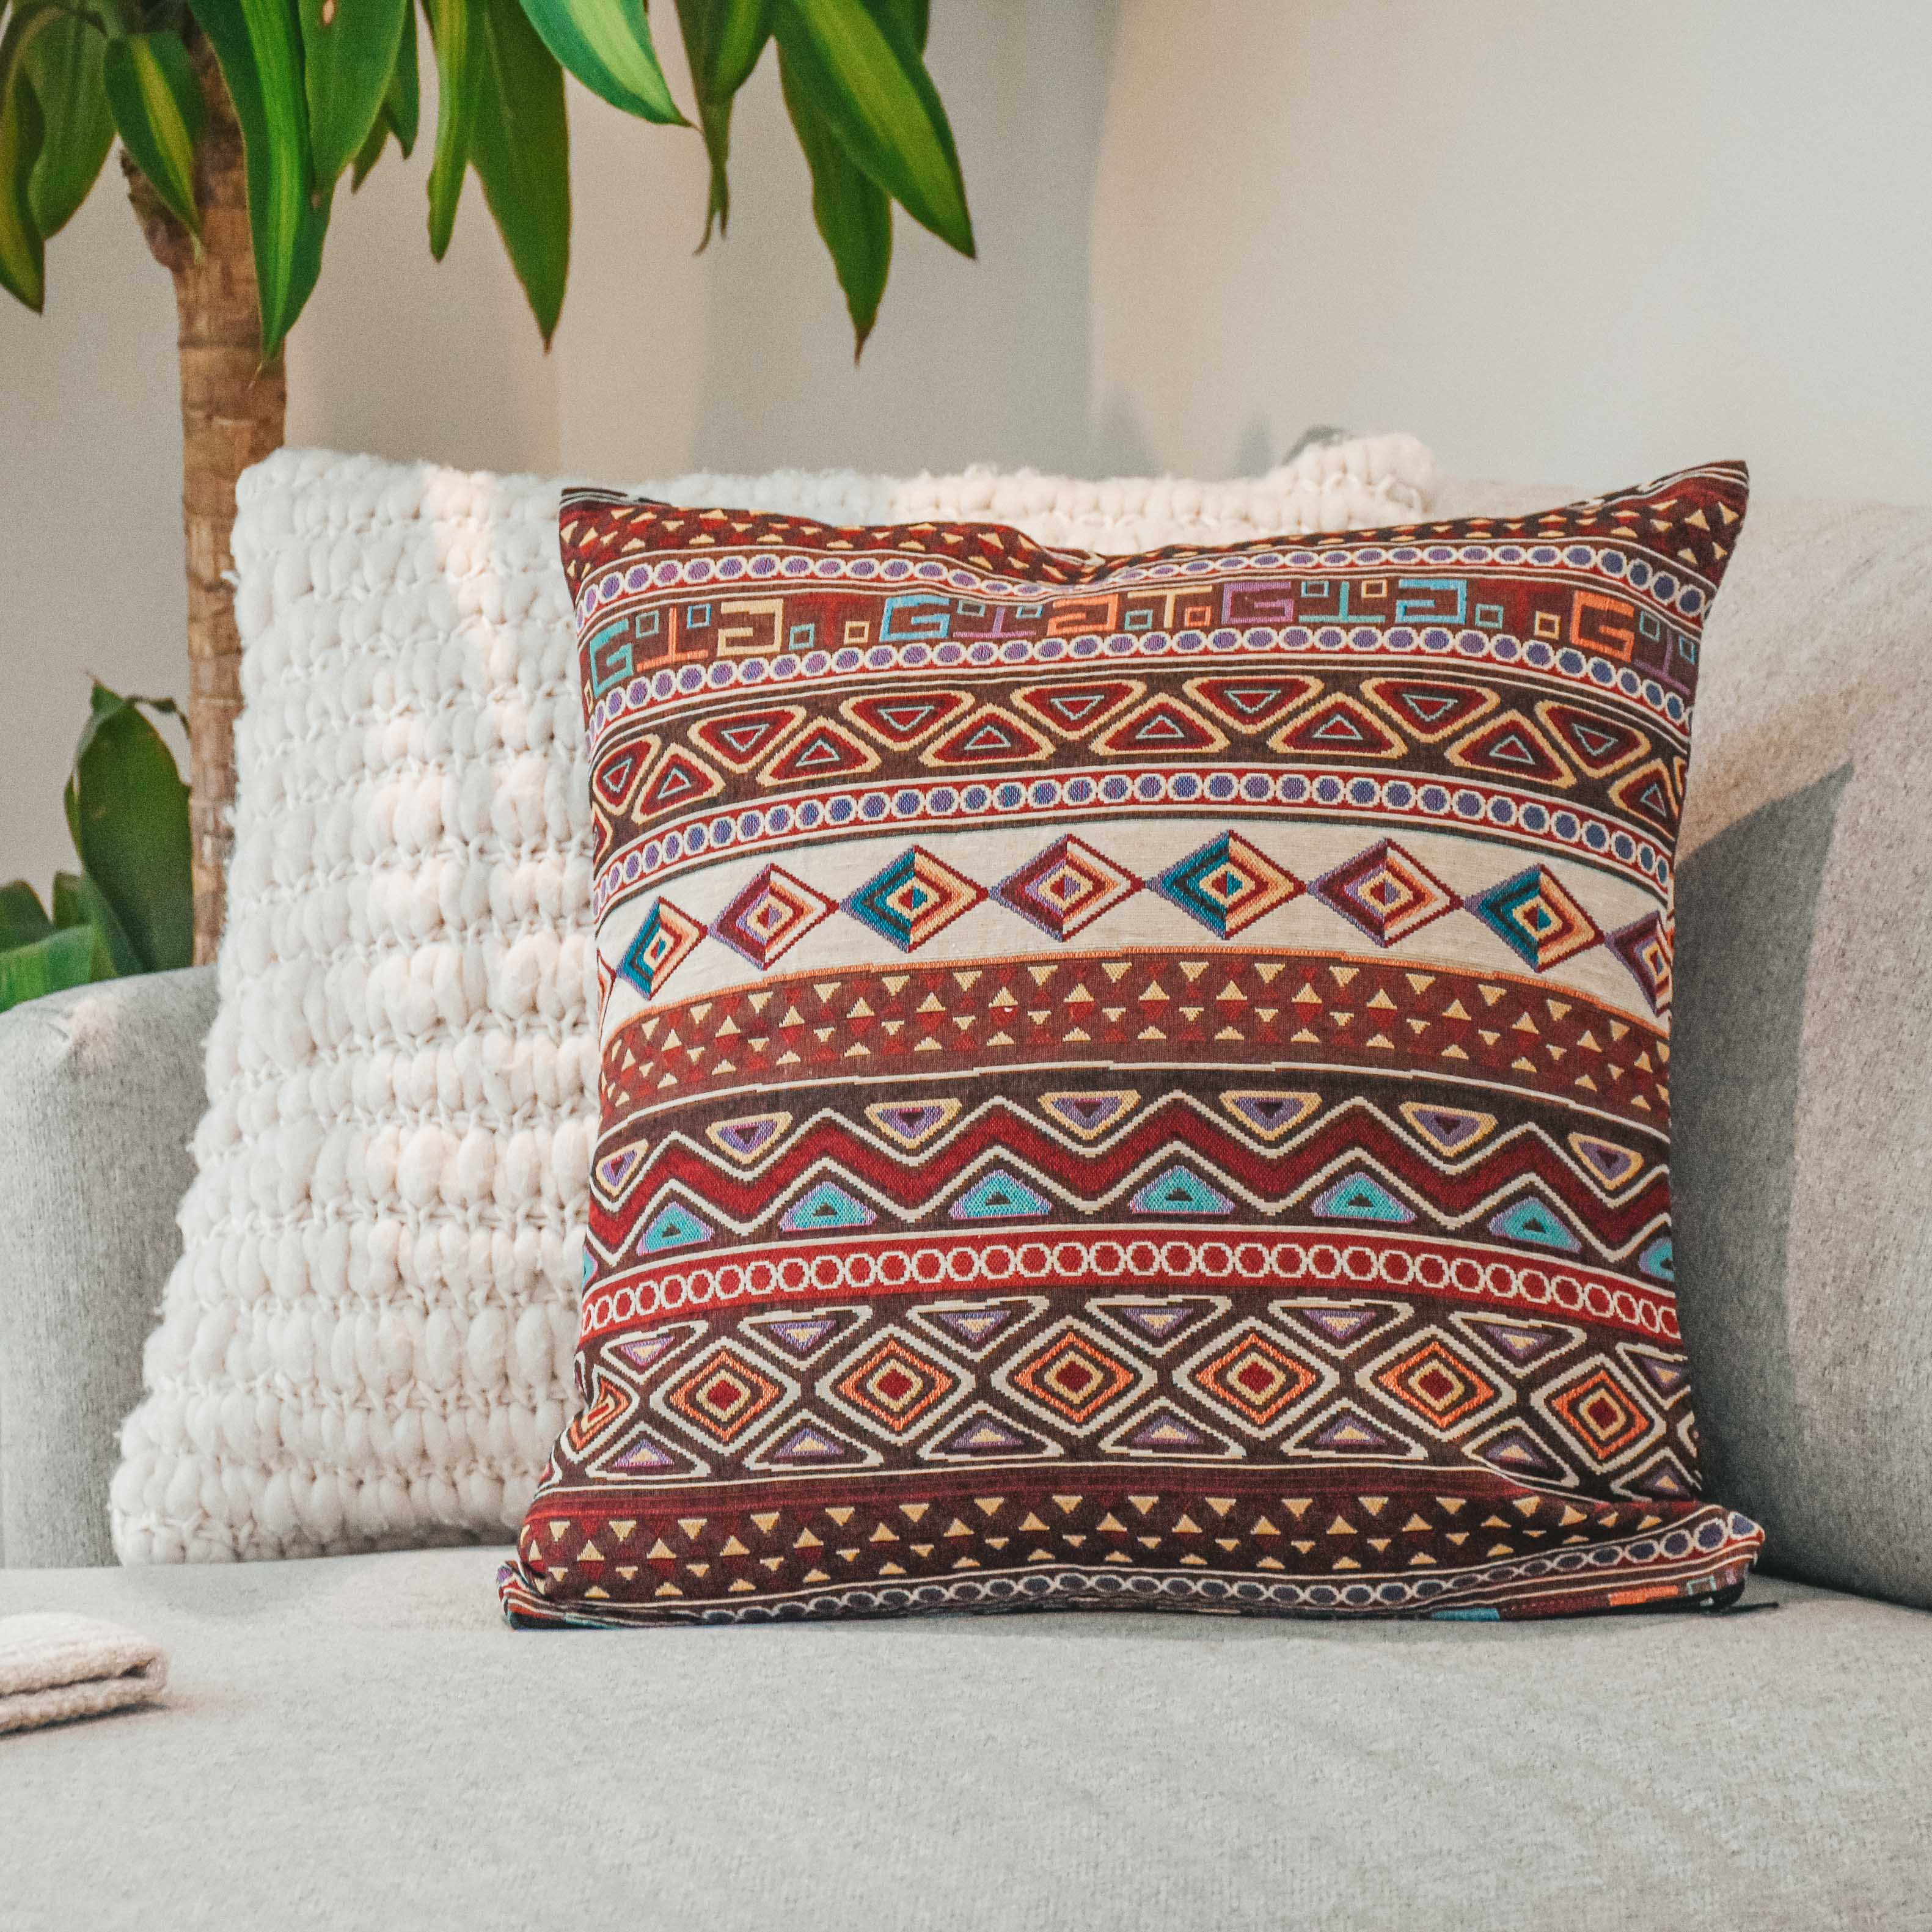 PERSIA PILLOW COVER Elepanta Pillows - Buy Today Elephant Pants Jewelry And Bohemian Clothes Handmade In Thailand Help To Save The Elephants FairTrade And Vegan